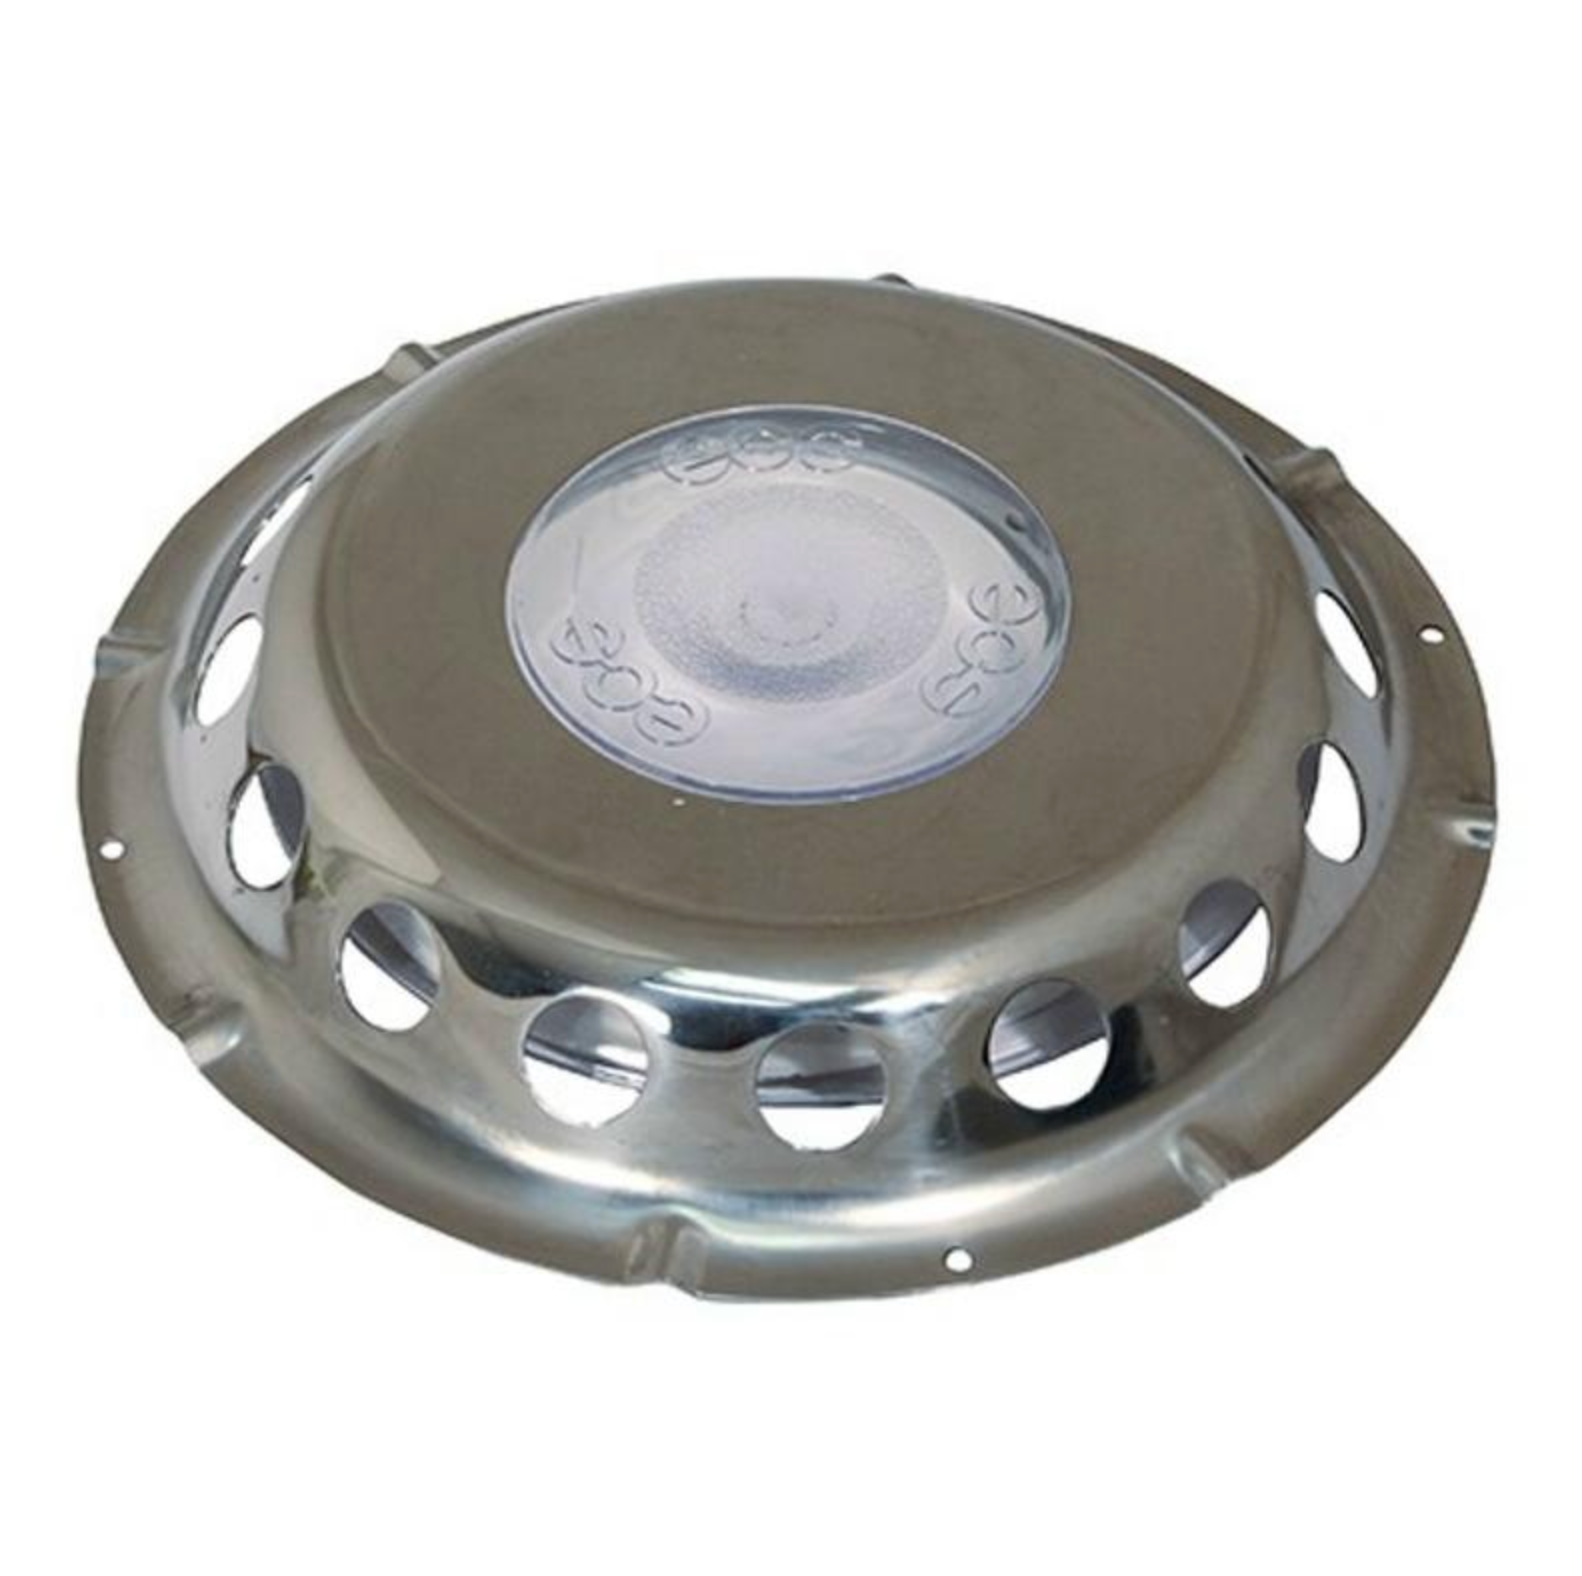 ECS Ventalite Clear Roof Vent with Stainless Steel Cover